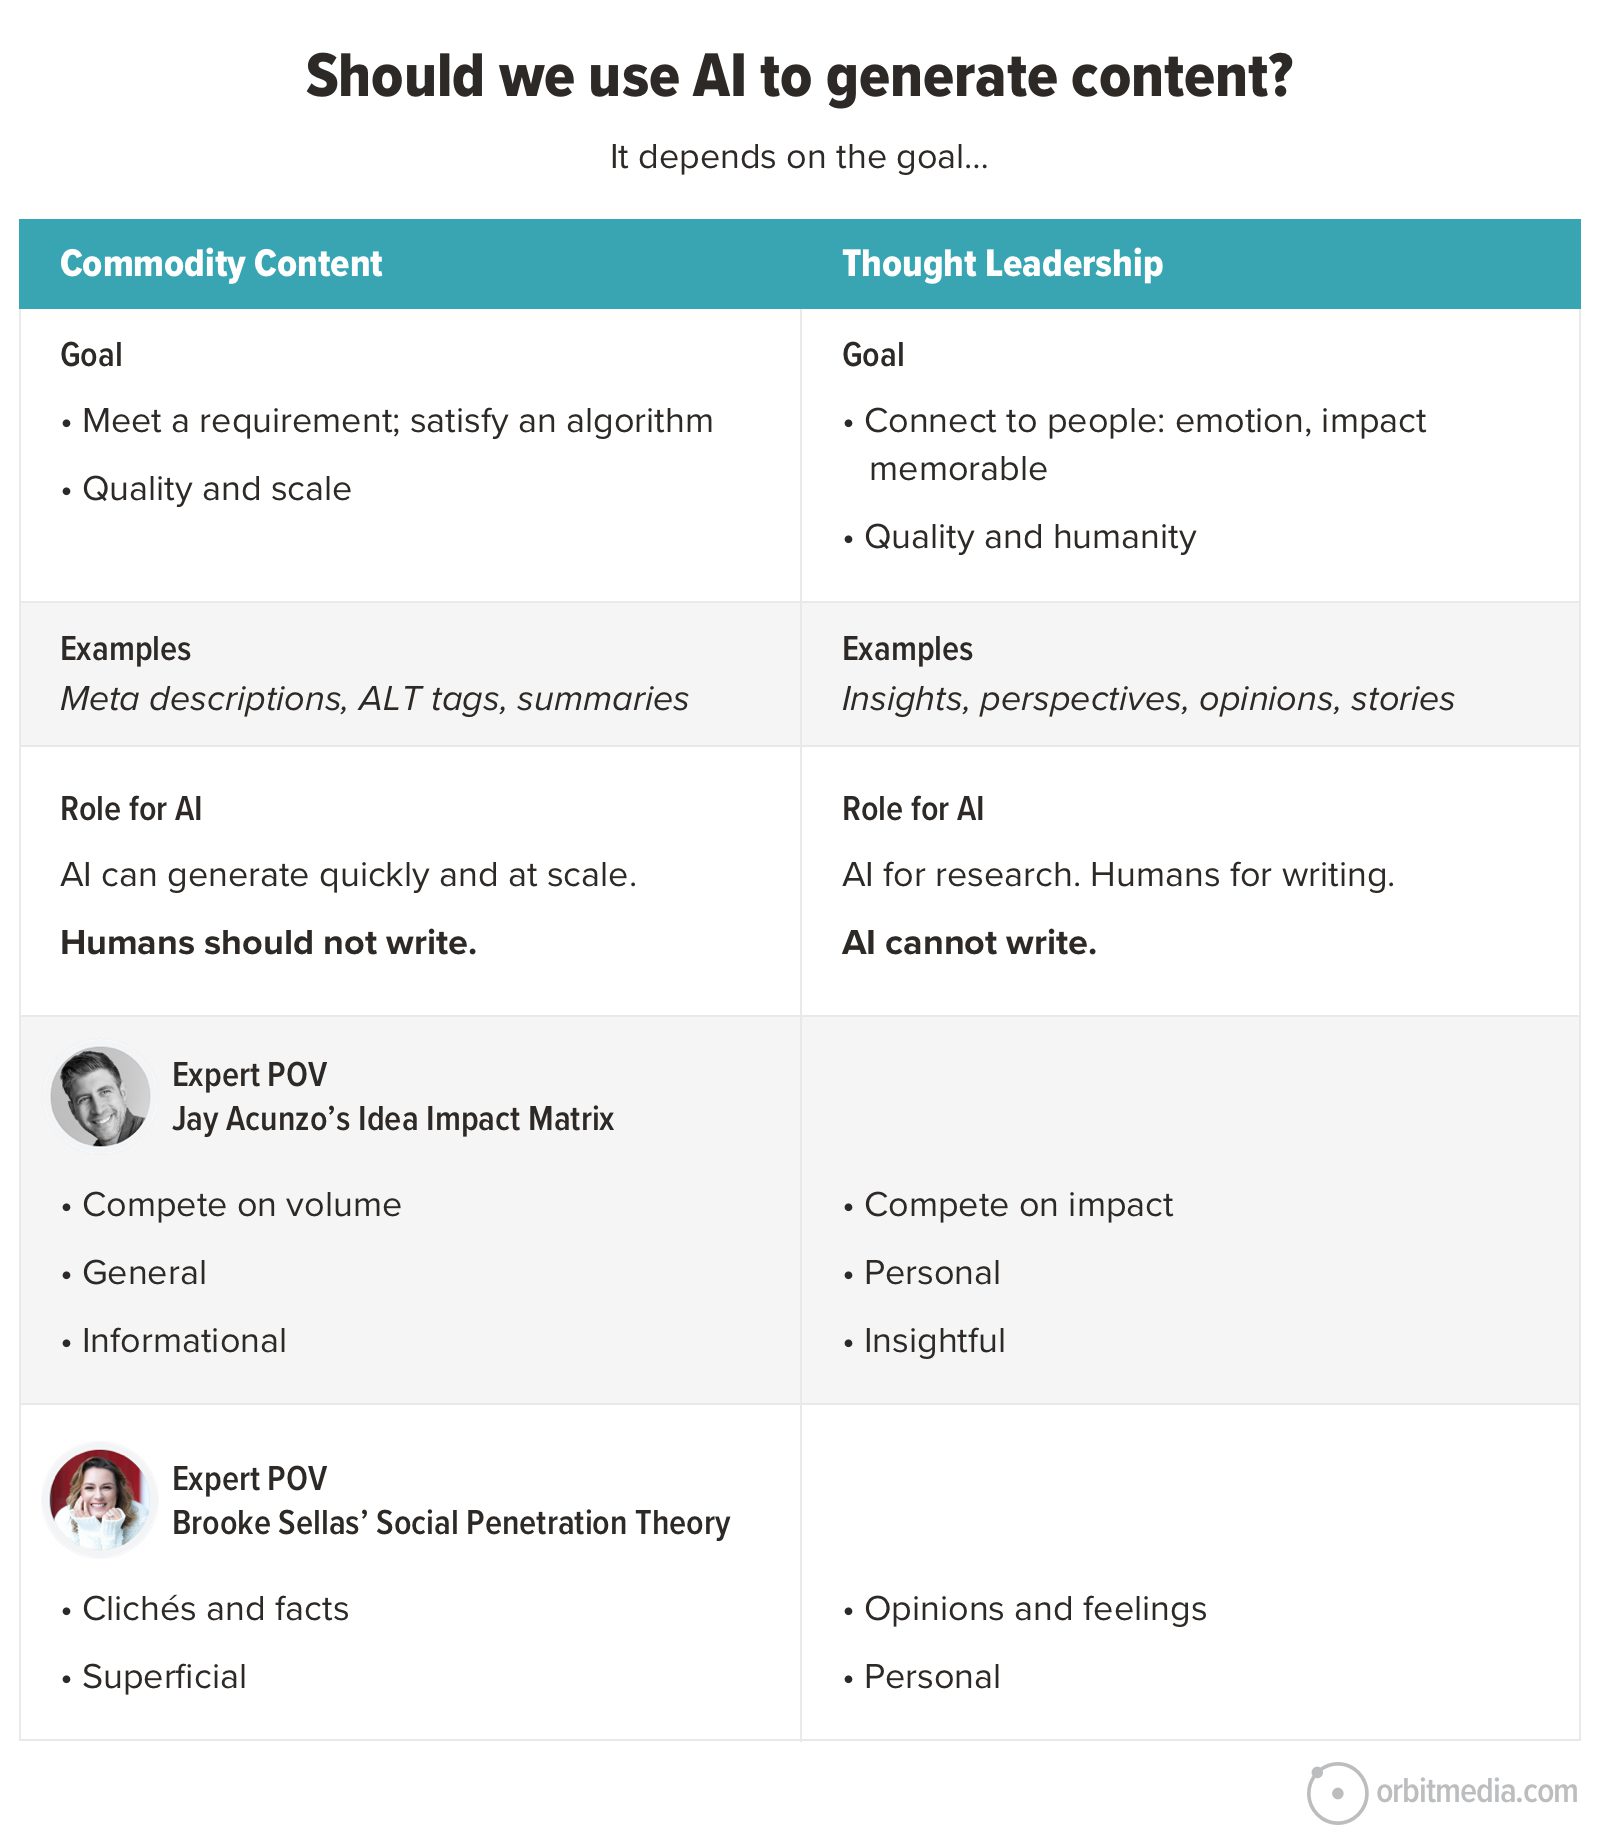 Comparison chart titled "Should we use AI to generate content?" with columns for "Commodity Content" and "Thought Leadership," detailing goals, examples, and roles for AI, including expert points of view.